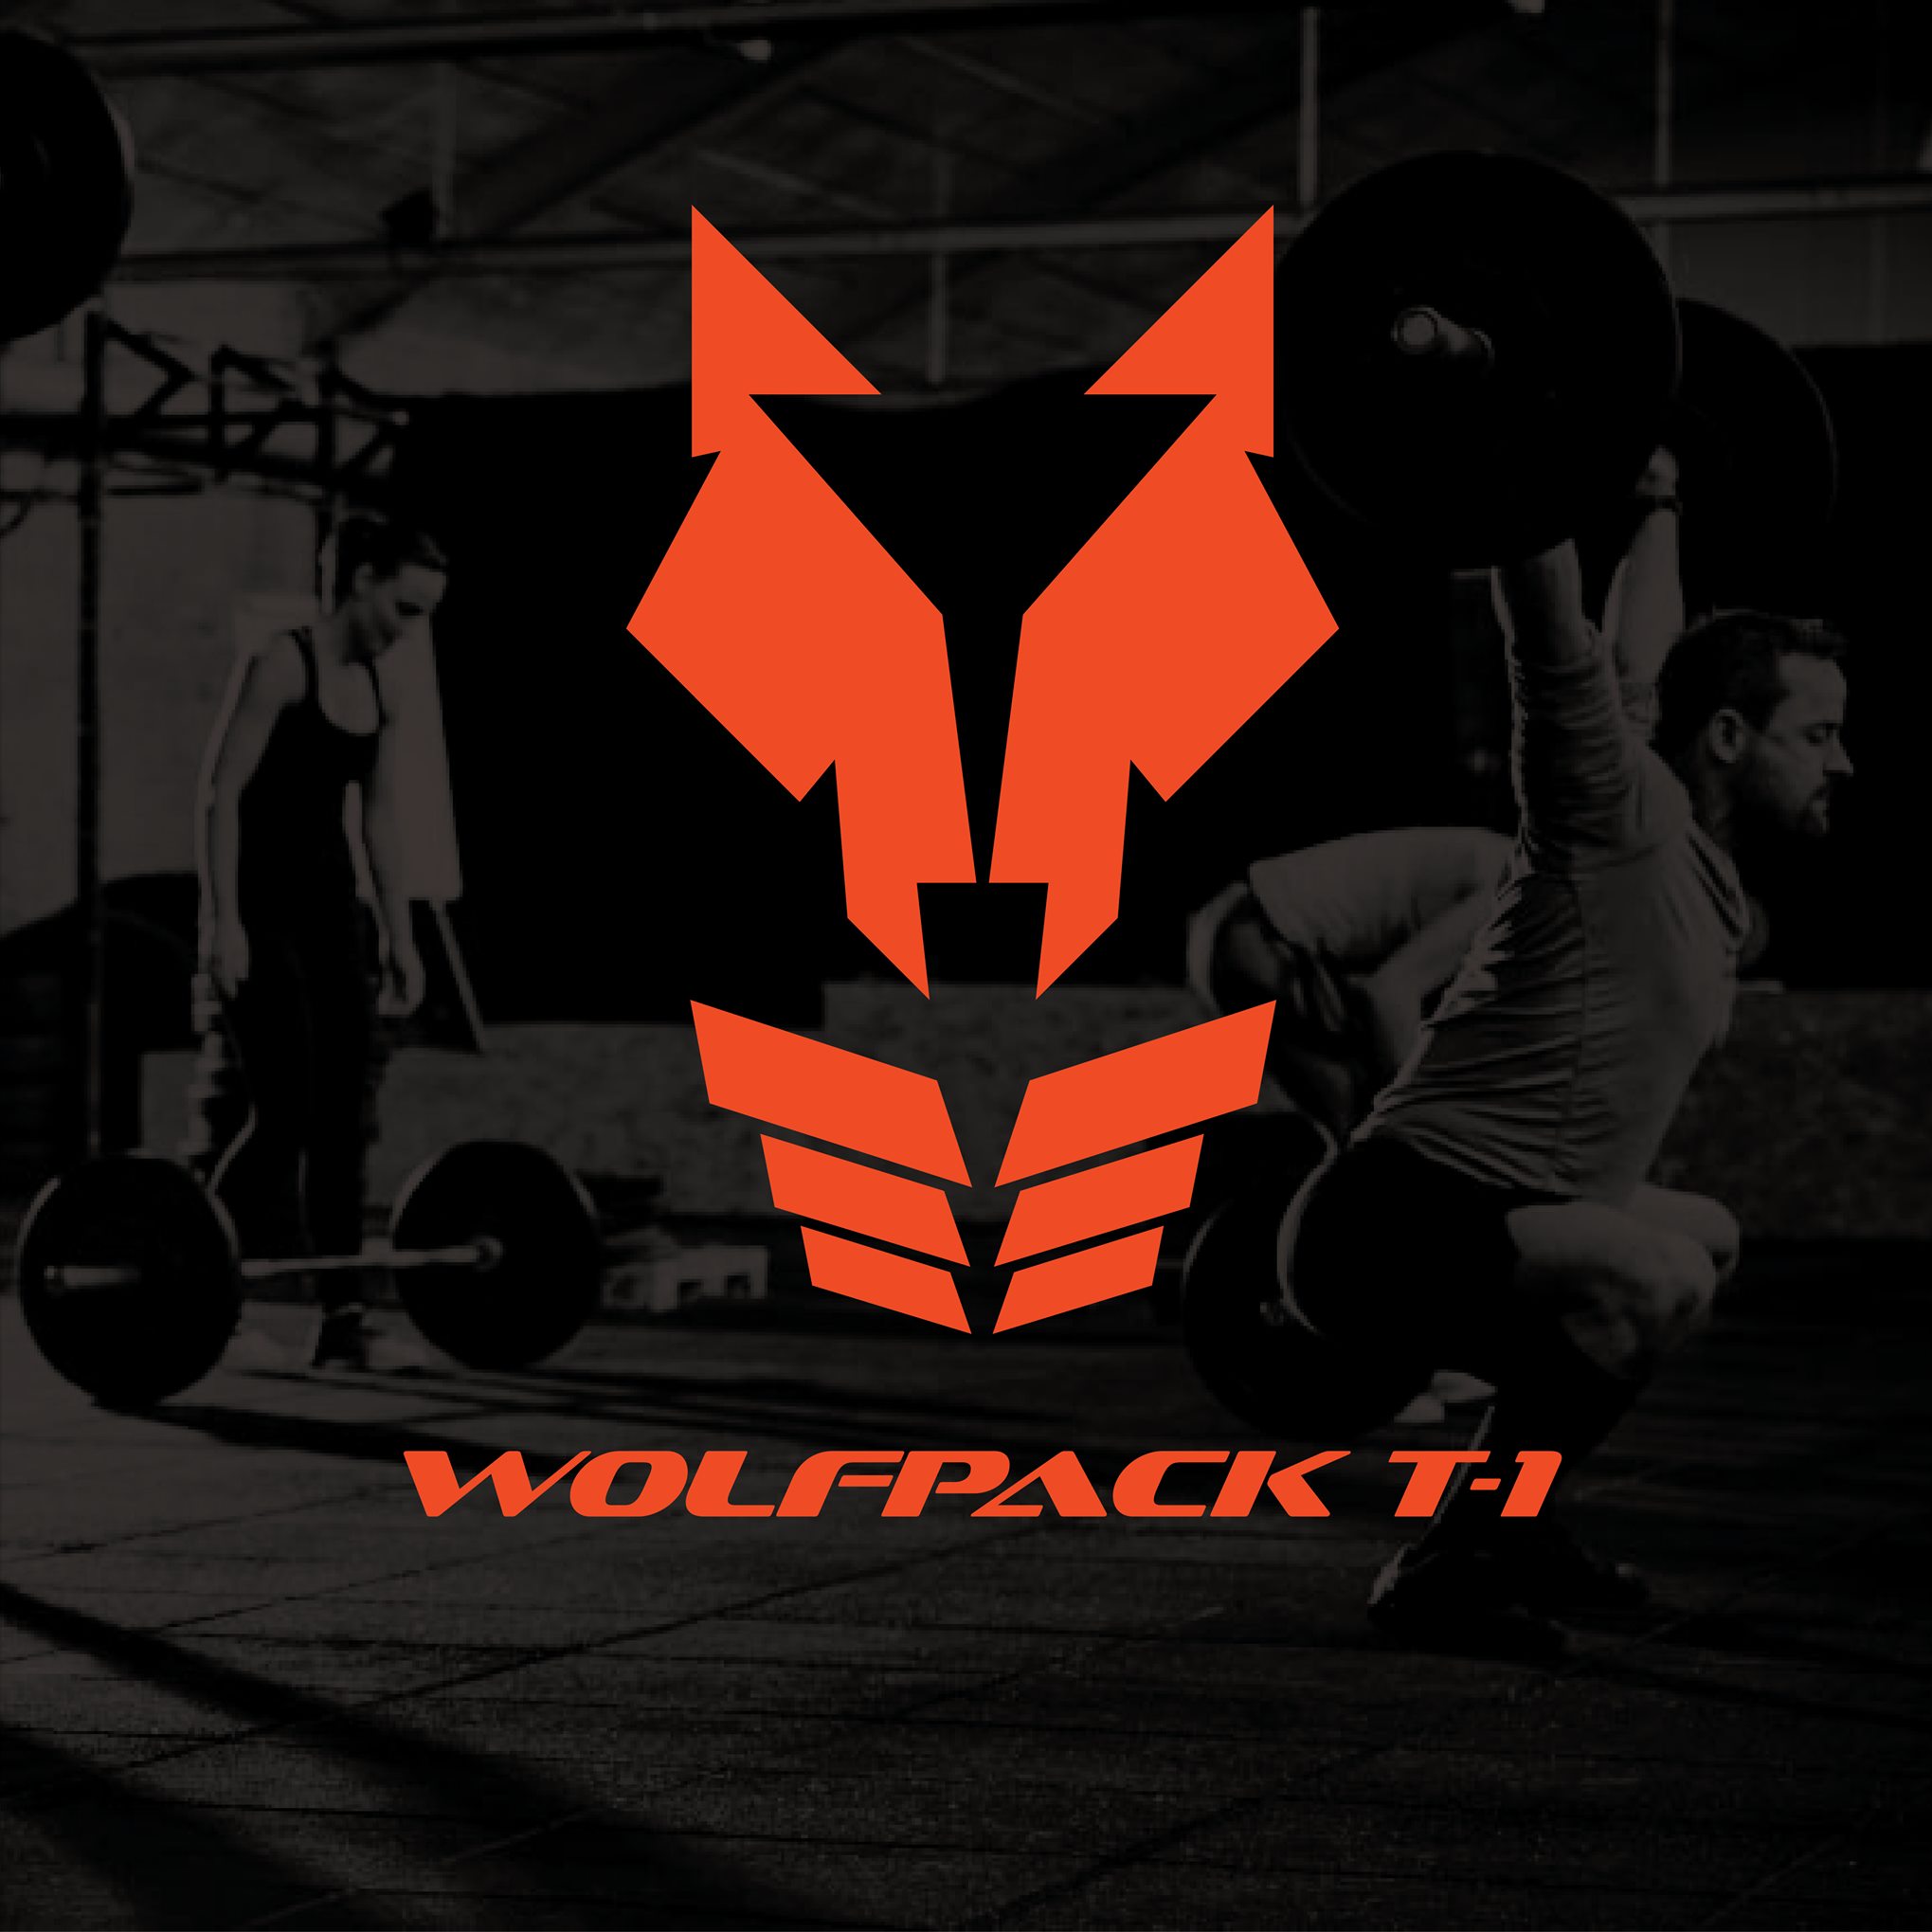 Images/Gyms/wolfpack pp.jpeg